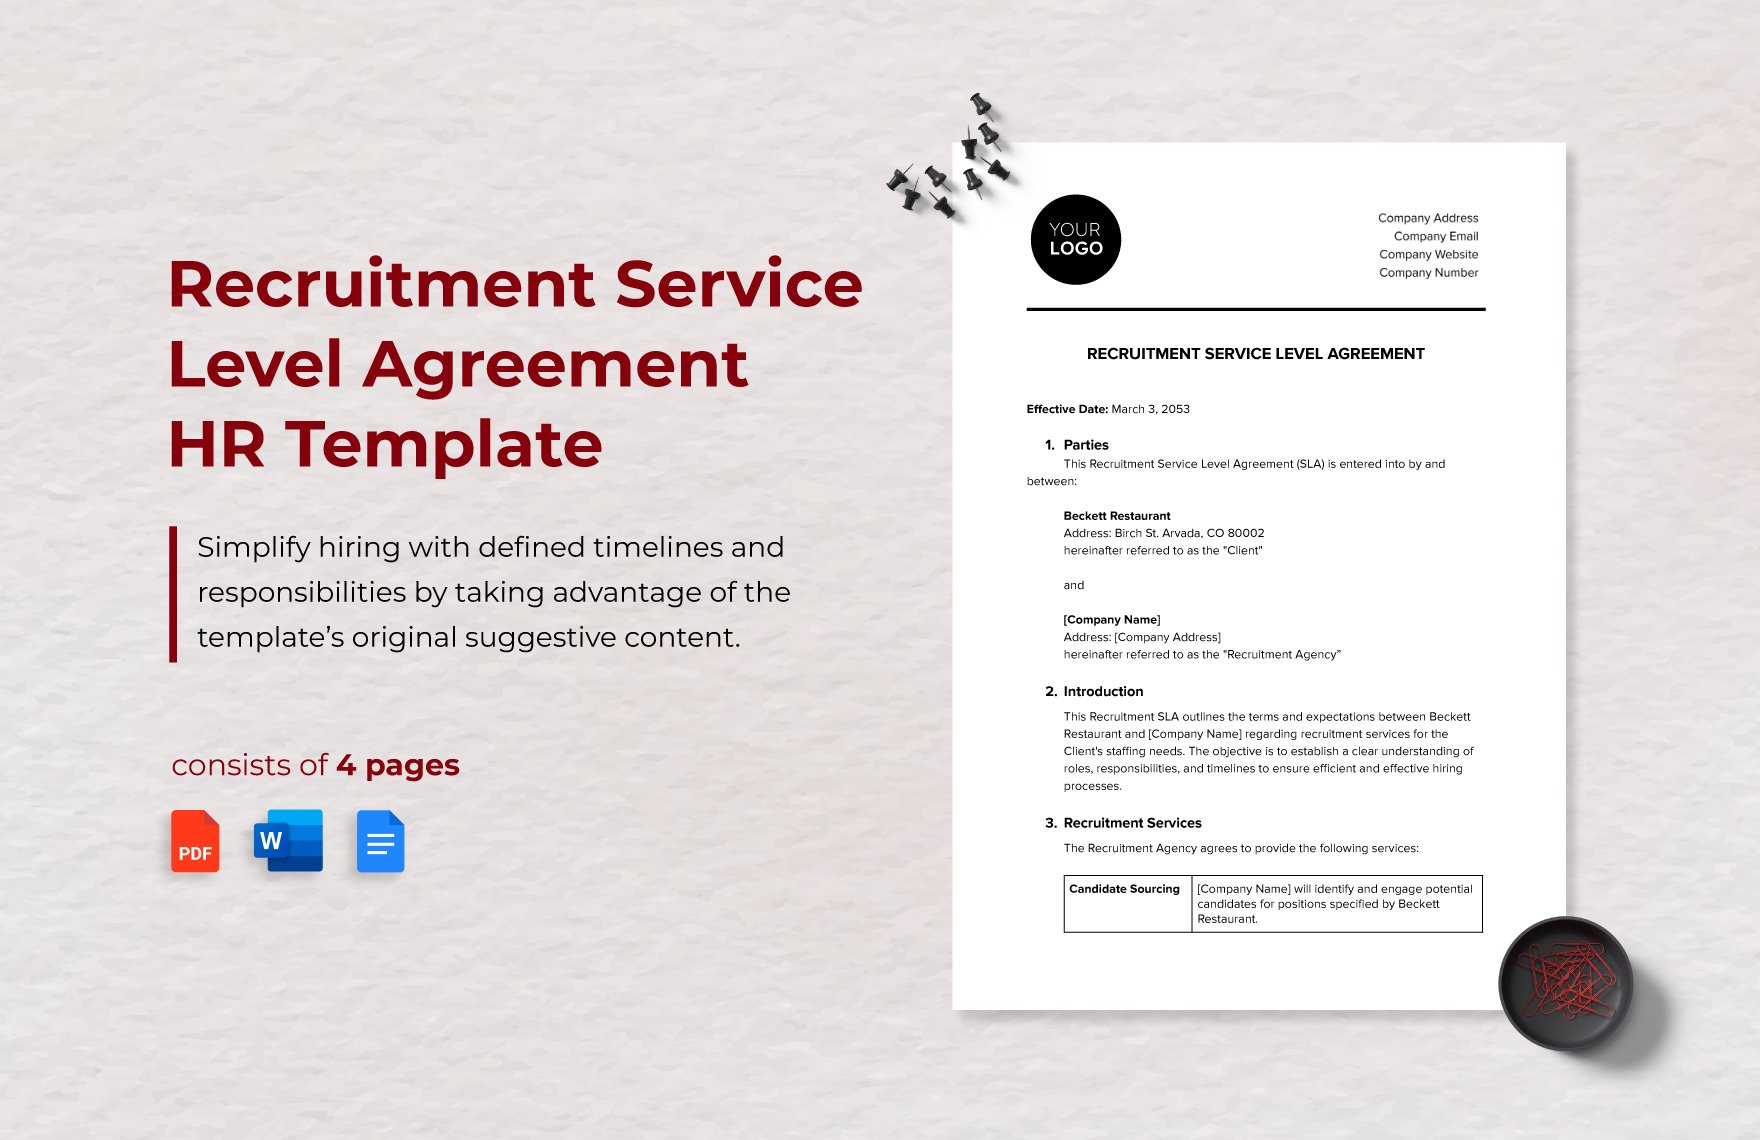 Recruitment Service Level Agreement HR Template in Word, Google Docs, PDF